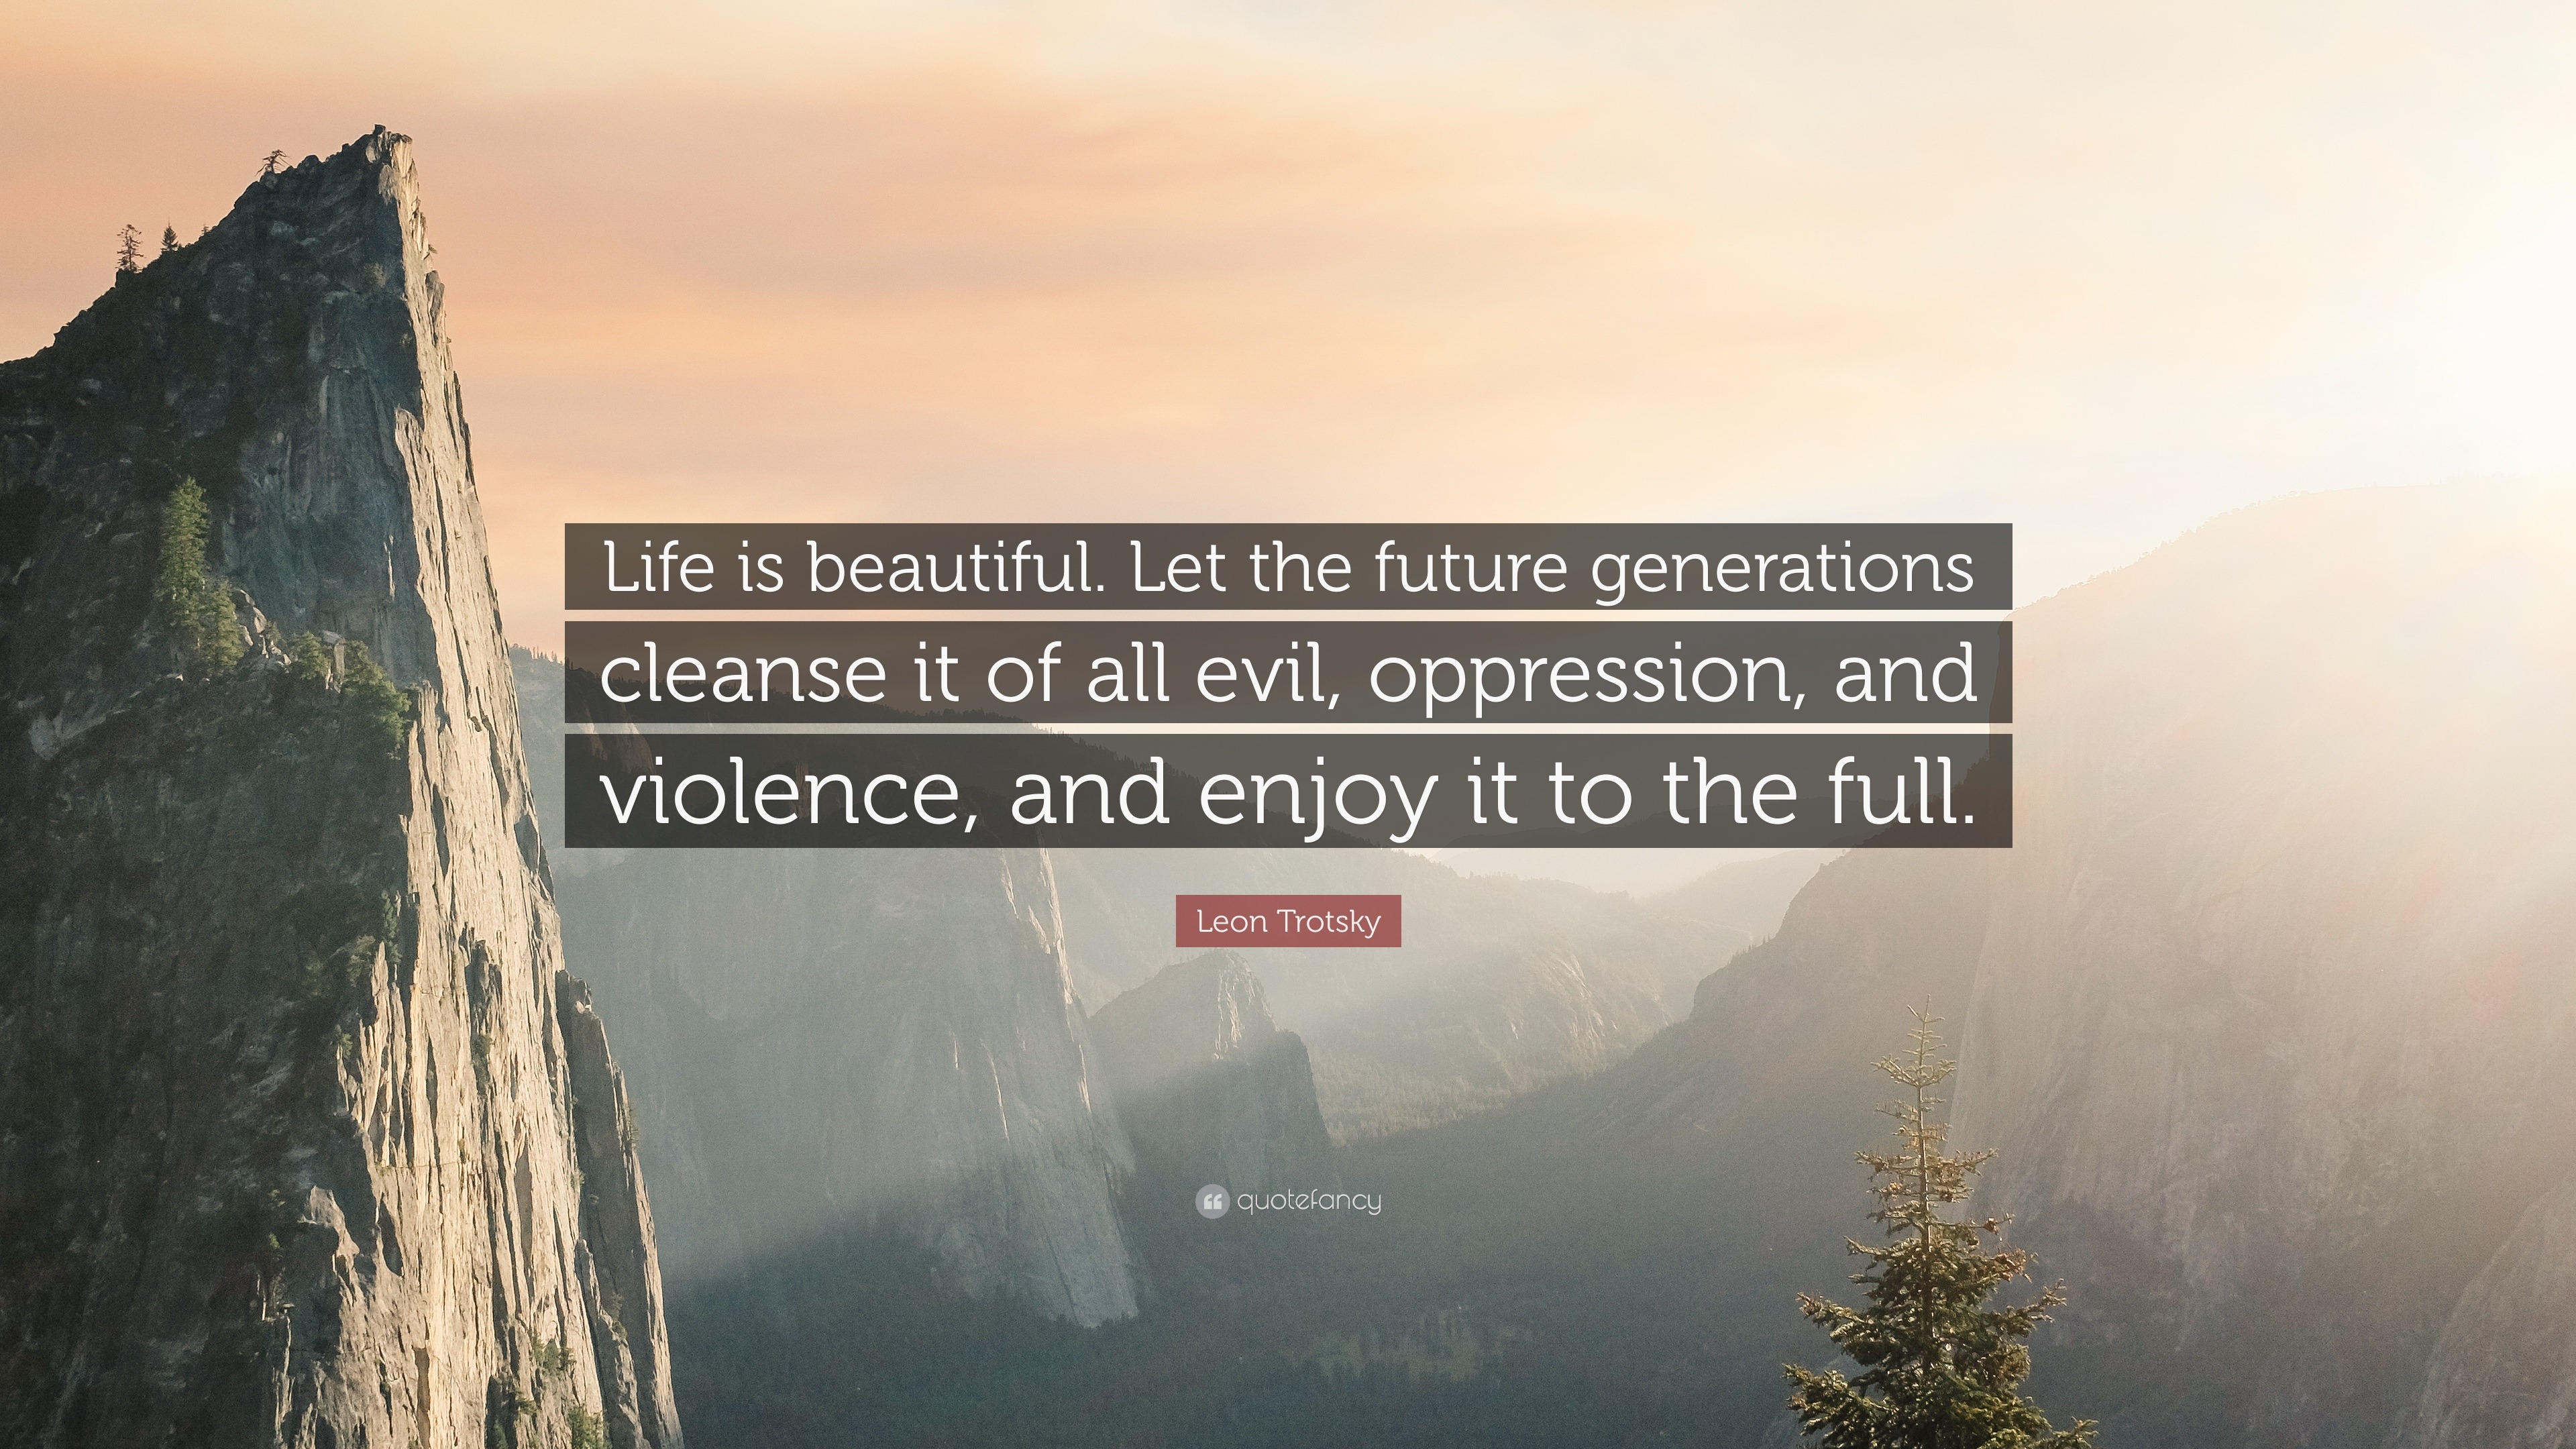 Leon Trotsky Quote “Life is beautiful Let the future generations cleanse it of